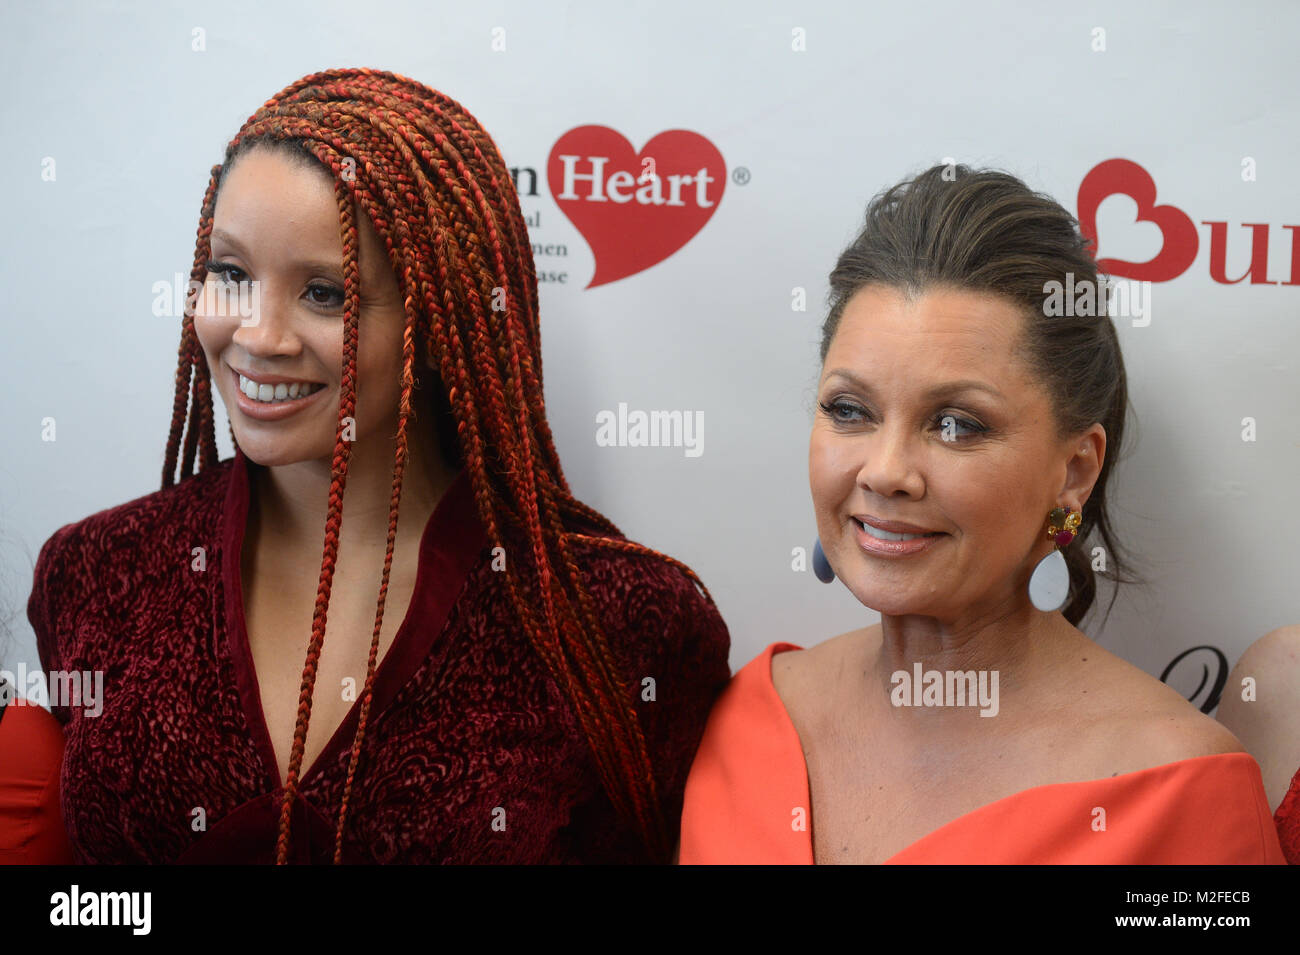 New York, USA. 6th February 2018. Jillian Hervey and Vanessa Williams team up with WomenHeart for the fight against heart disease in women at Burlington Union Square on February 6, 2018 in New York City. Credit: Erik Pendzich/Alamy Live News Stock Photo